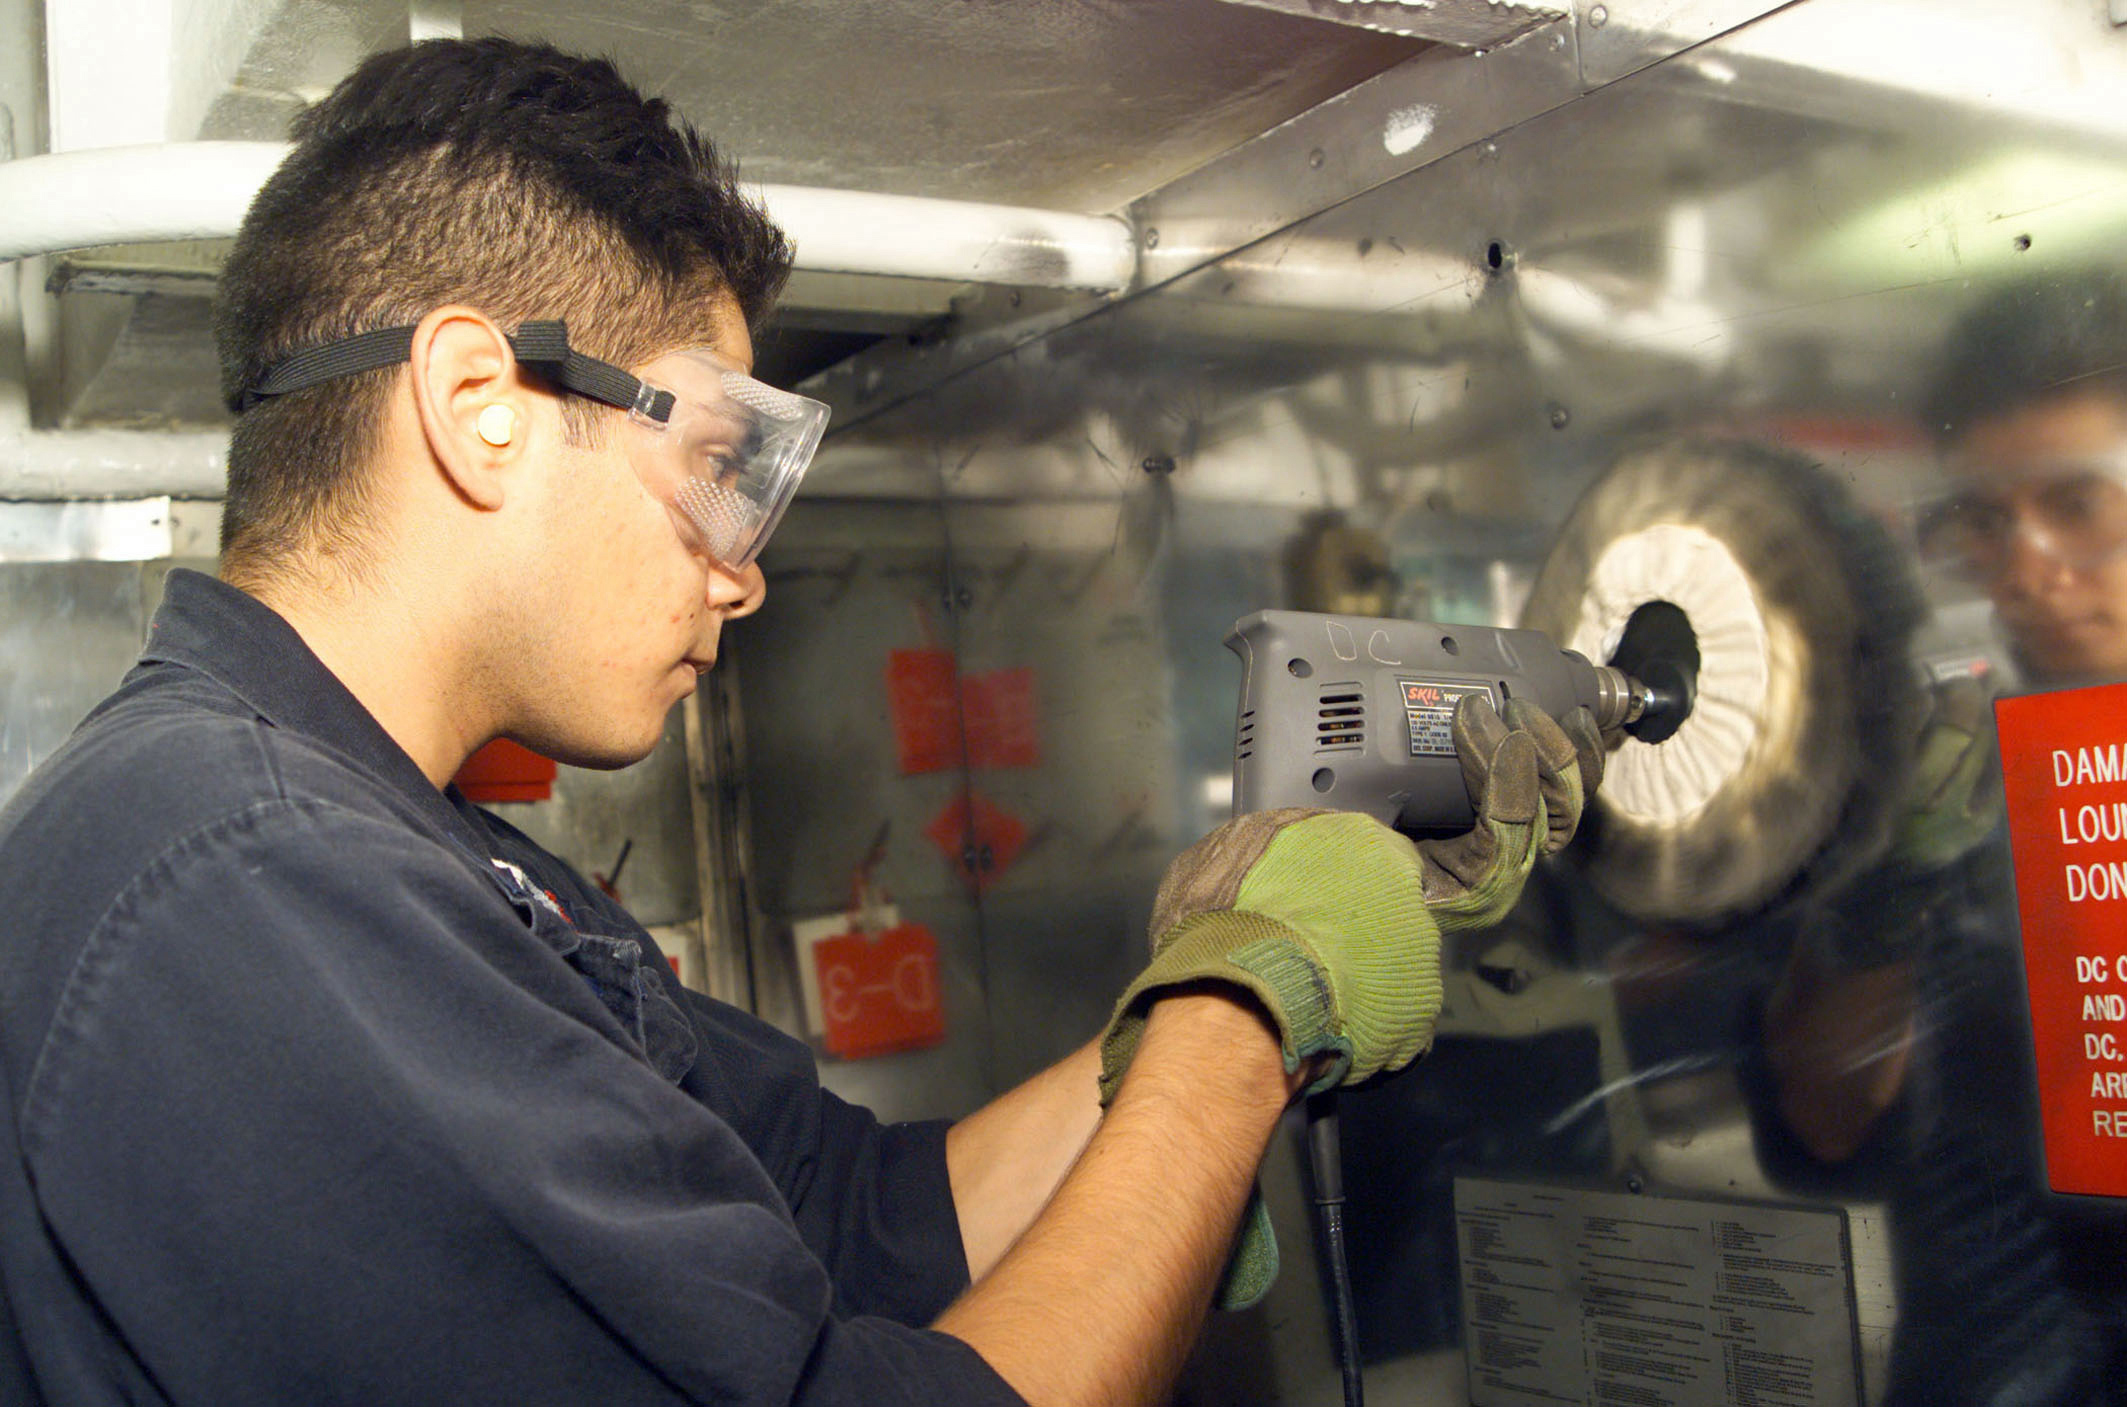 US Navy 020813-N-8770A-001 Damage Controlman buffs a stainless steel bulkhead in Damage Control Central